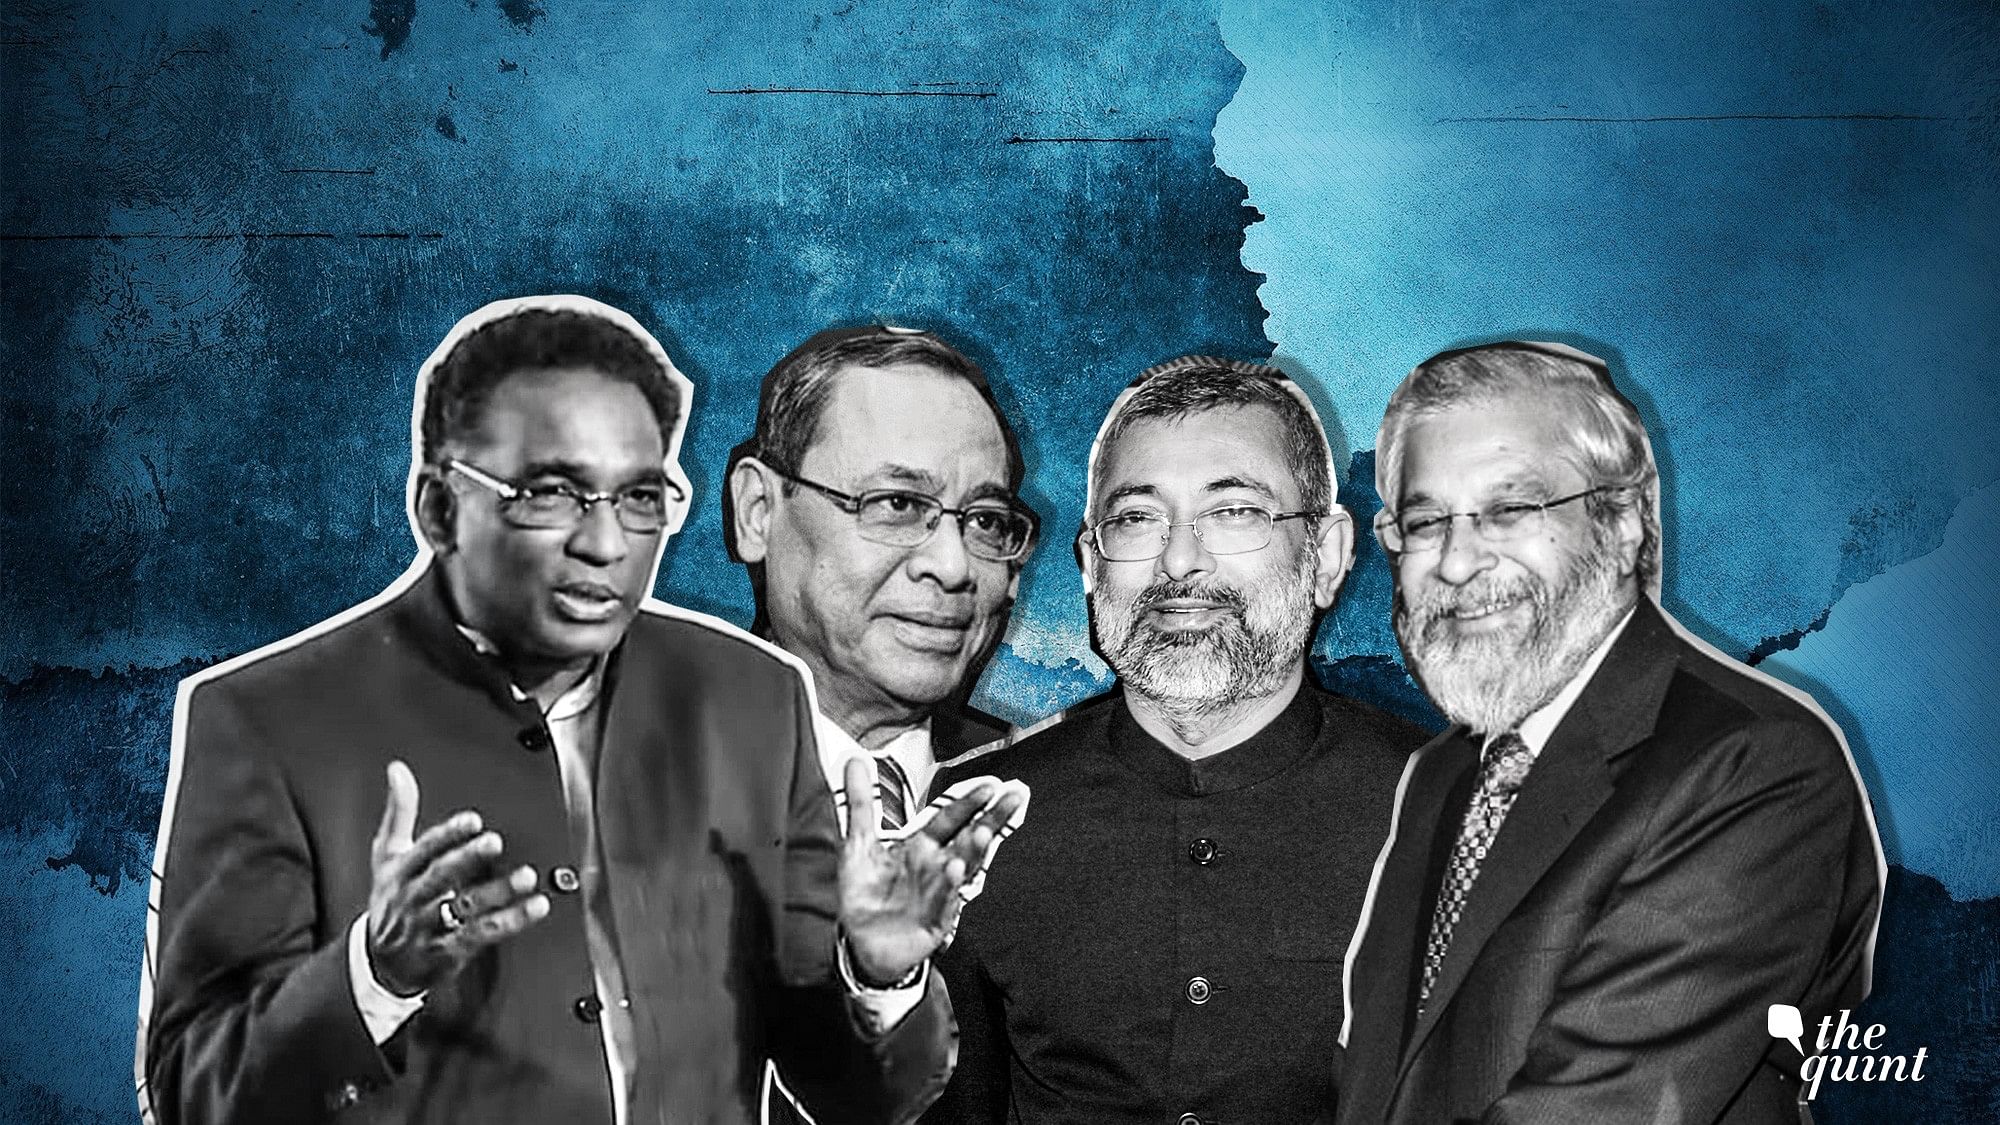 Justices Chelameswar (L), Kurian Joseph (RC) and Madan Lokur (R) will retire in 2018. They are members of the Collegium alongside Justice Ranjan Gogoi (LC), who will be the next CJI.